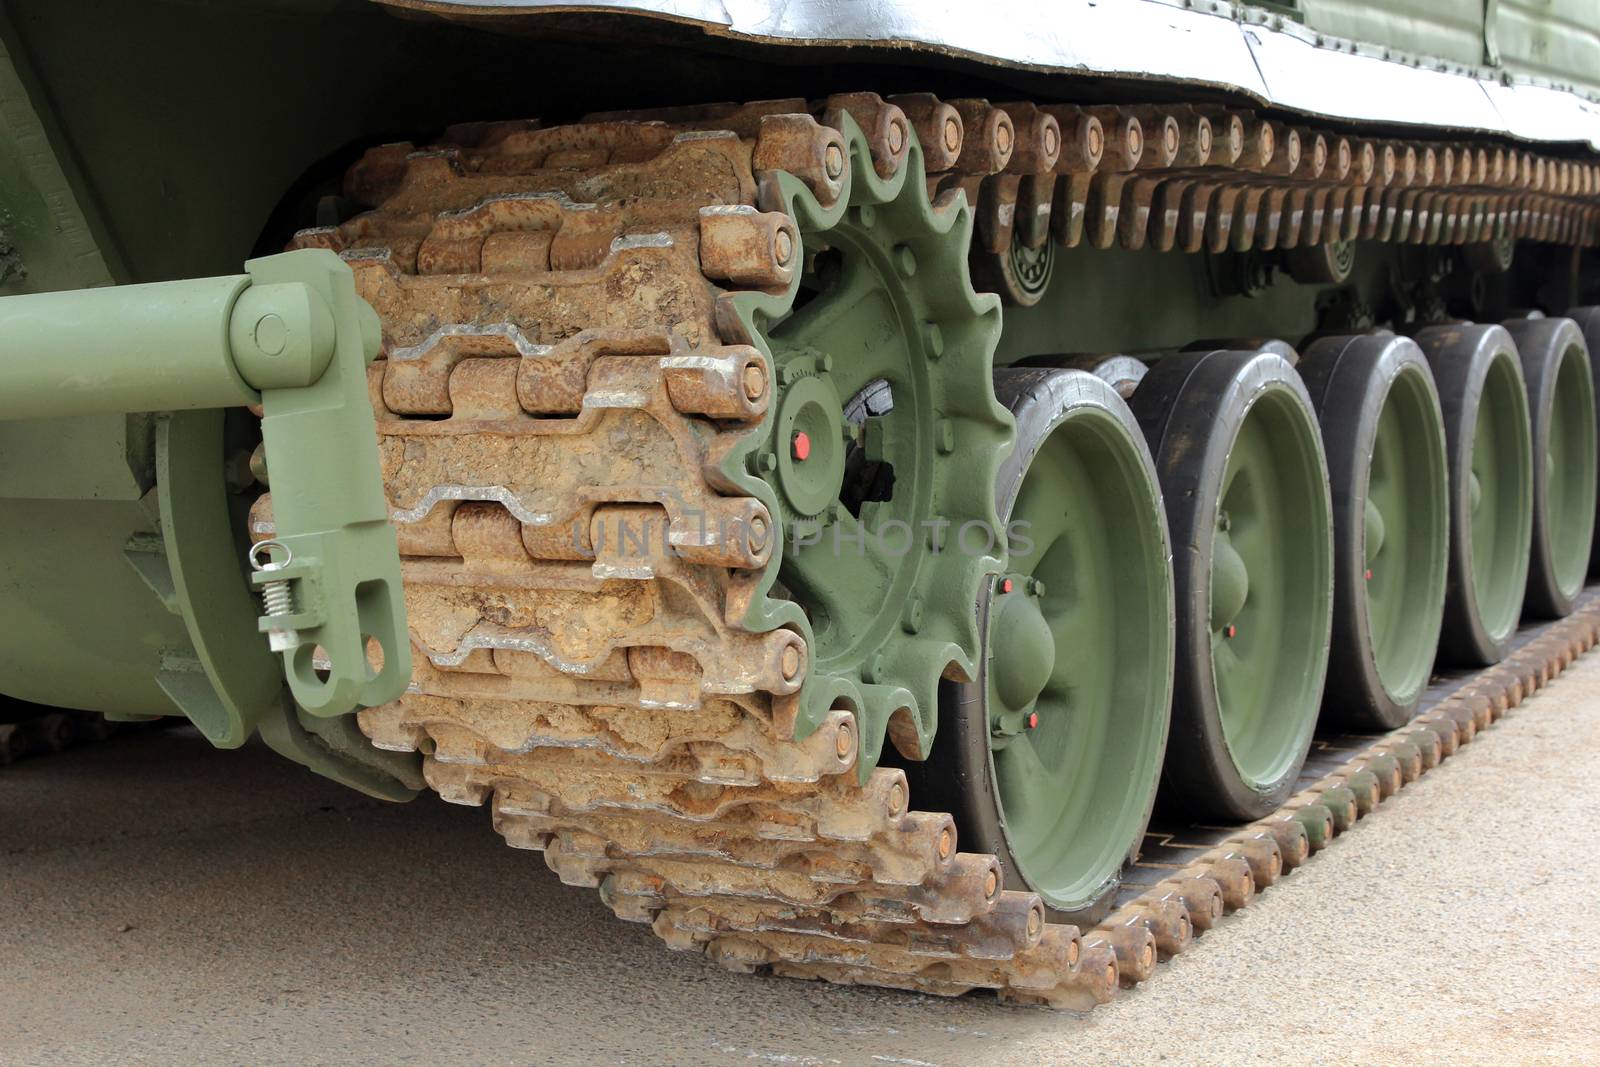 Part of the undercarriage of tracked military equipment, close-up